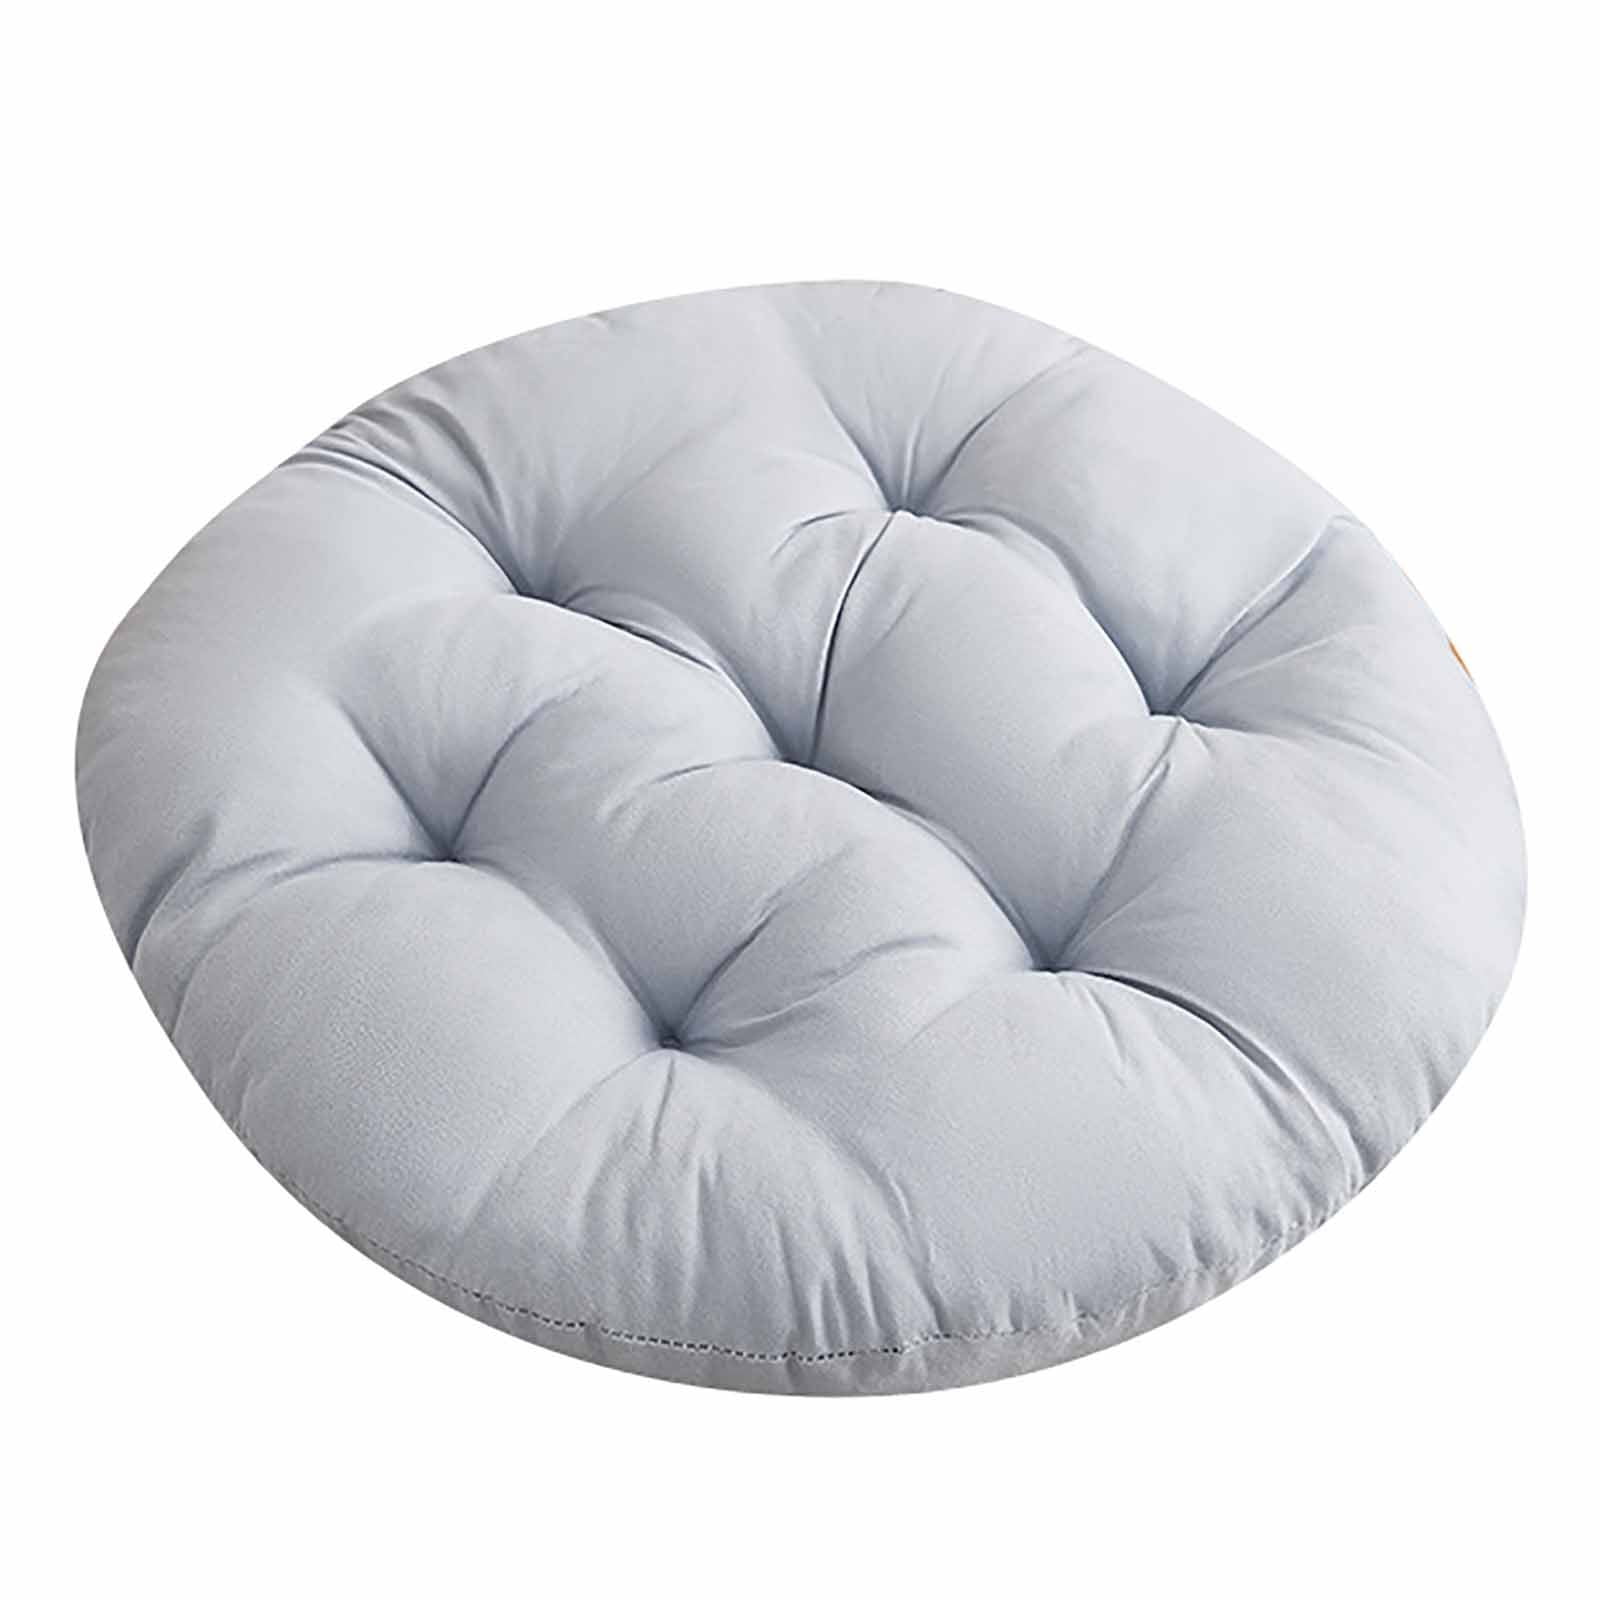 Zeceouar Round Chair Cushions,Indoor/Outdoor Round Seat Cushions Chair Seat  Pad Floor Cushion Pillow Round Stool Pad For Garden Patio Furniture,Round